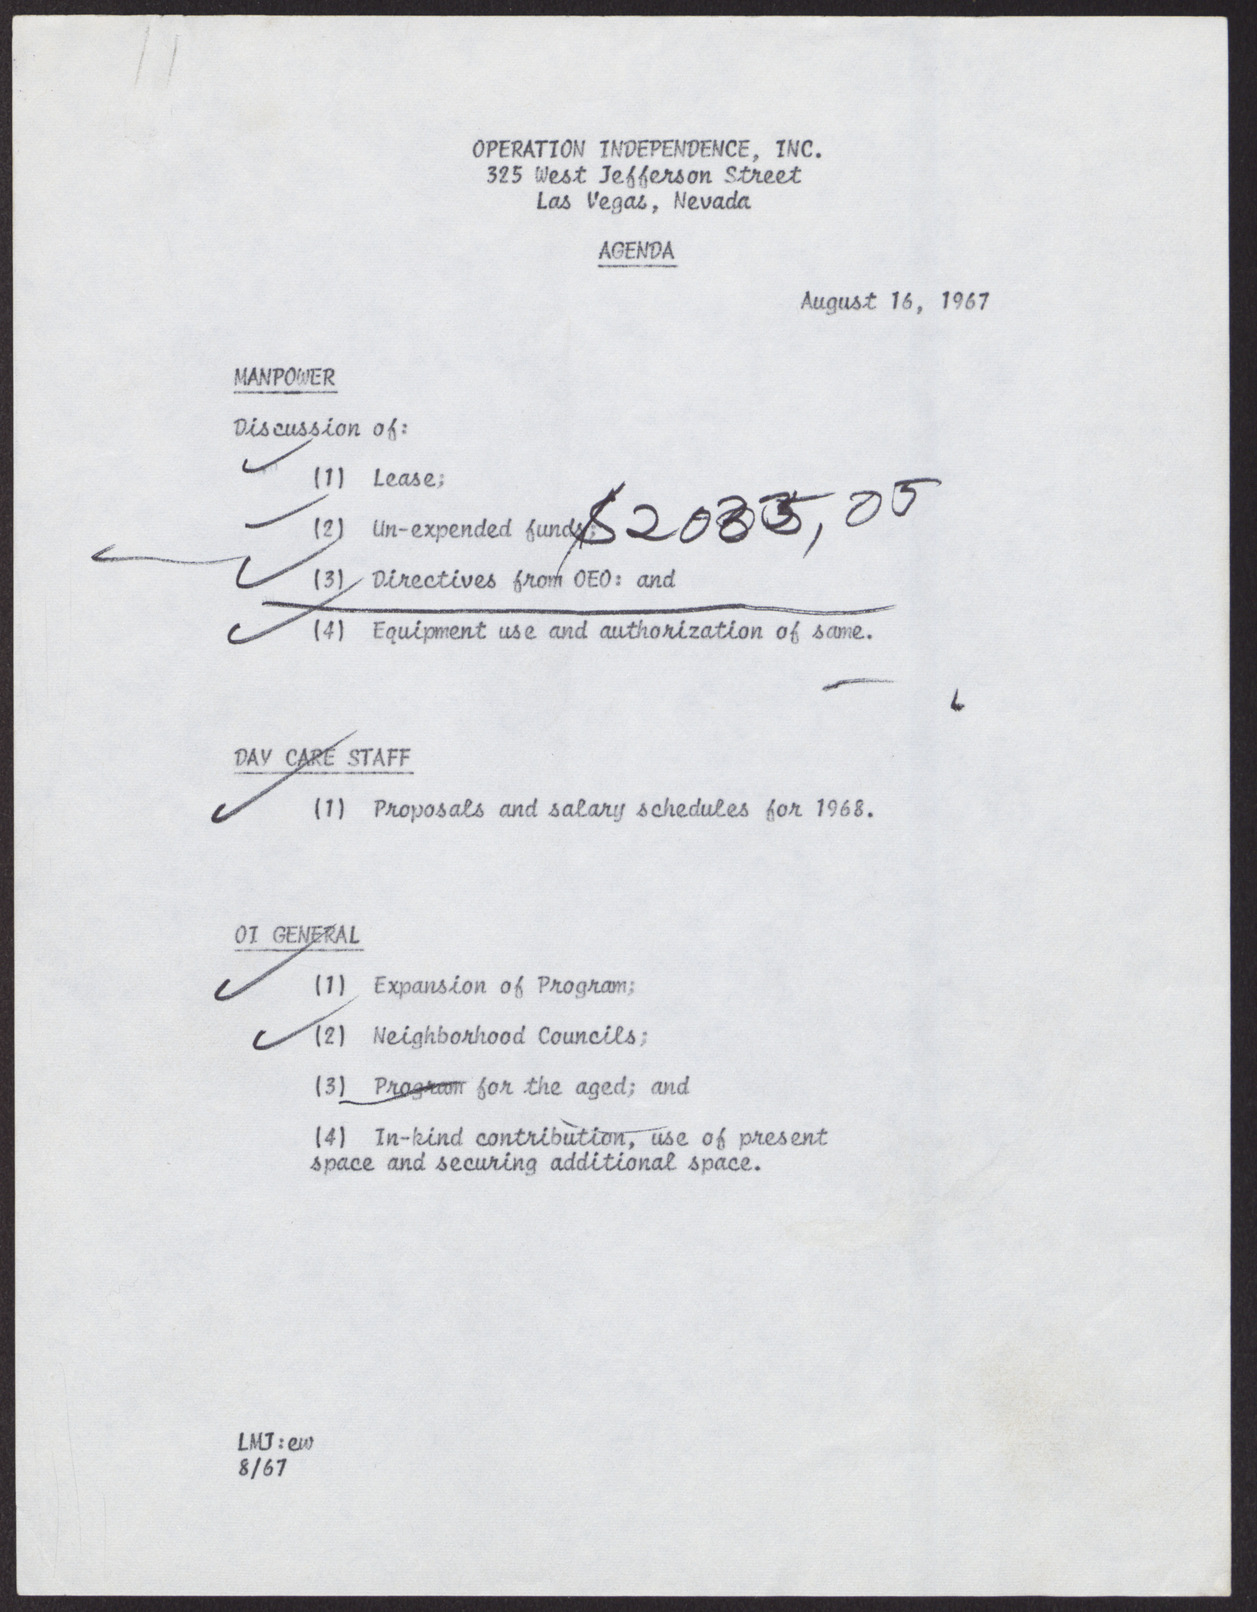 Operation Independence, Inc. Meeting Agenda and Recommendations by Lubertha M. Johnson (2 pages), August 16, 1967